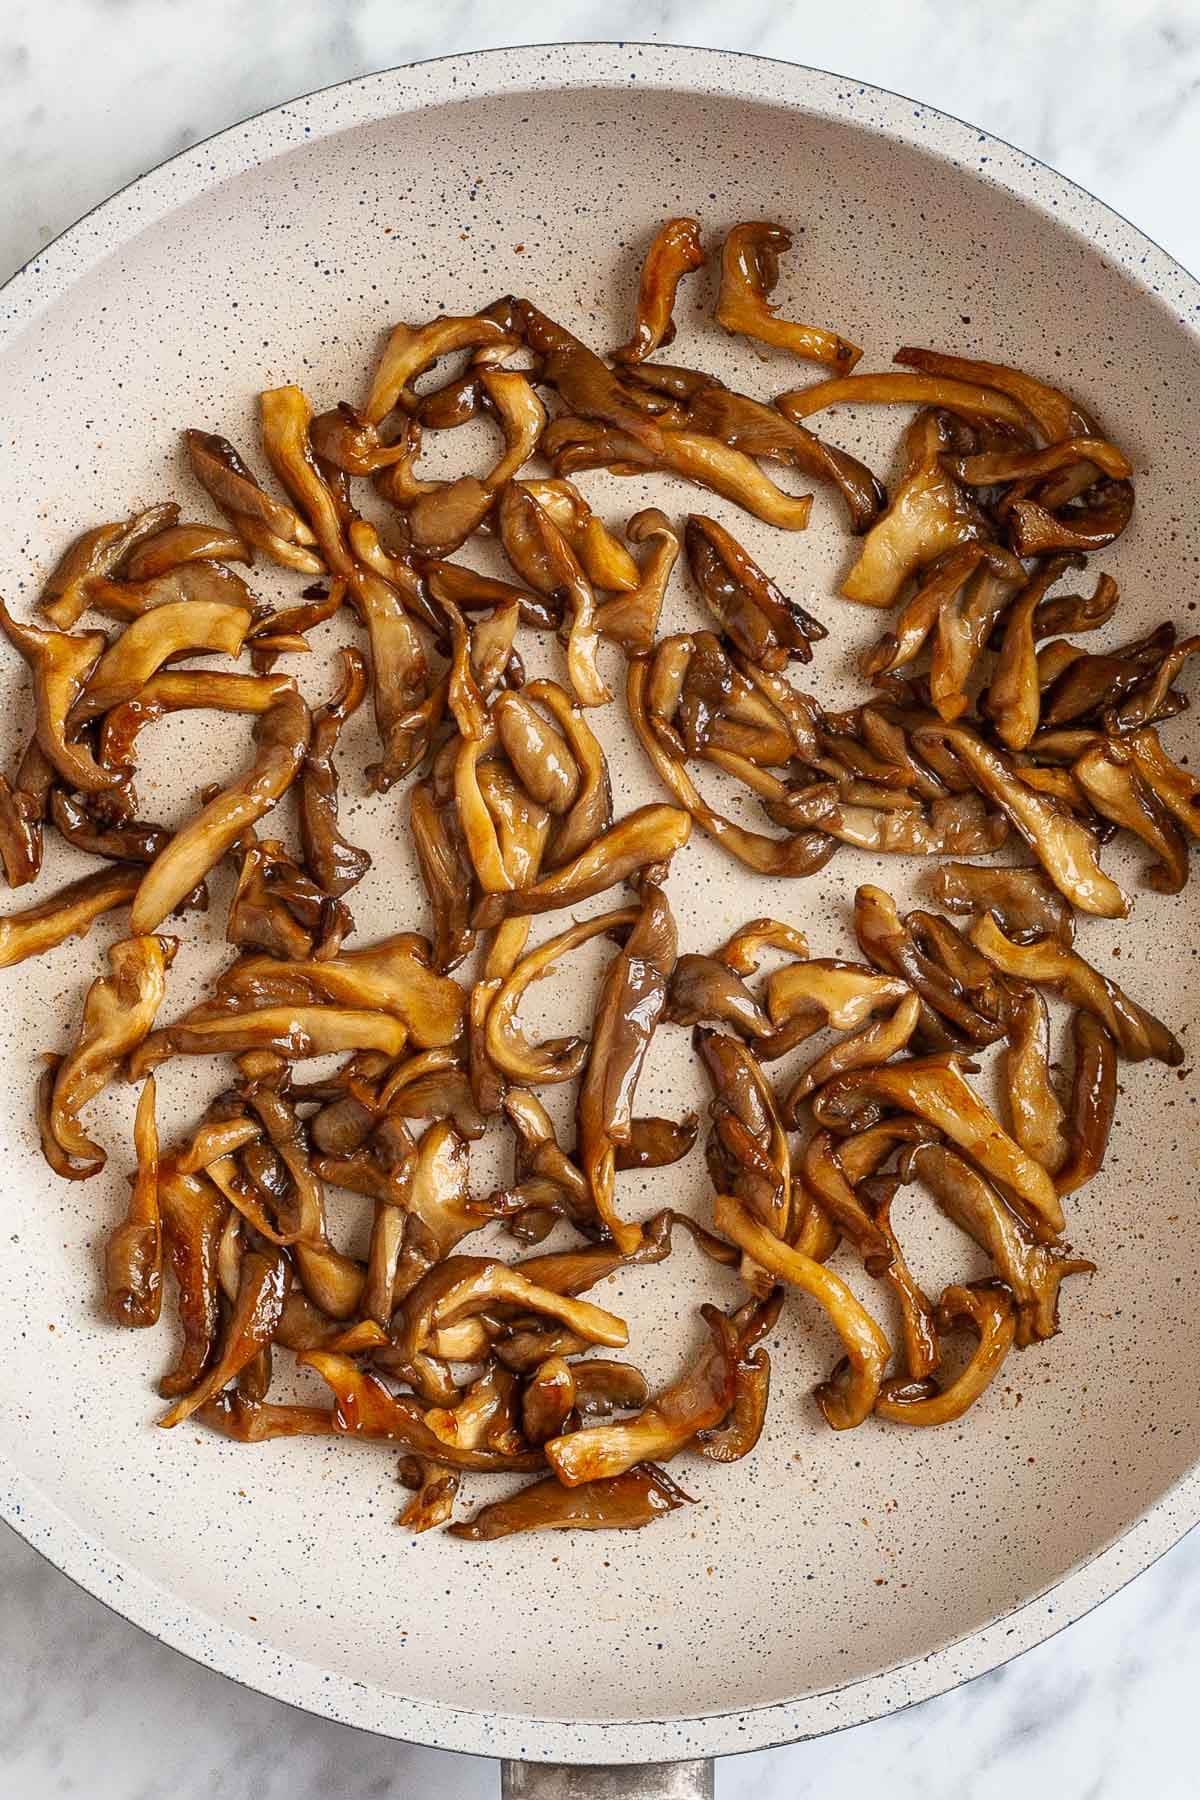 White frying pan with brown glazed mushroom slices